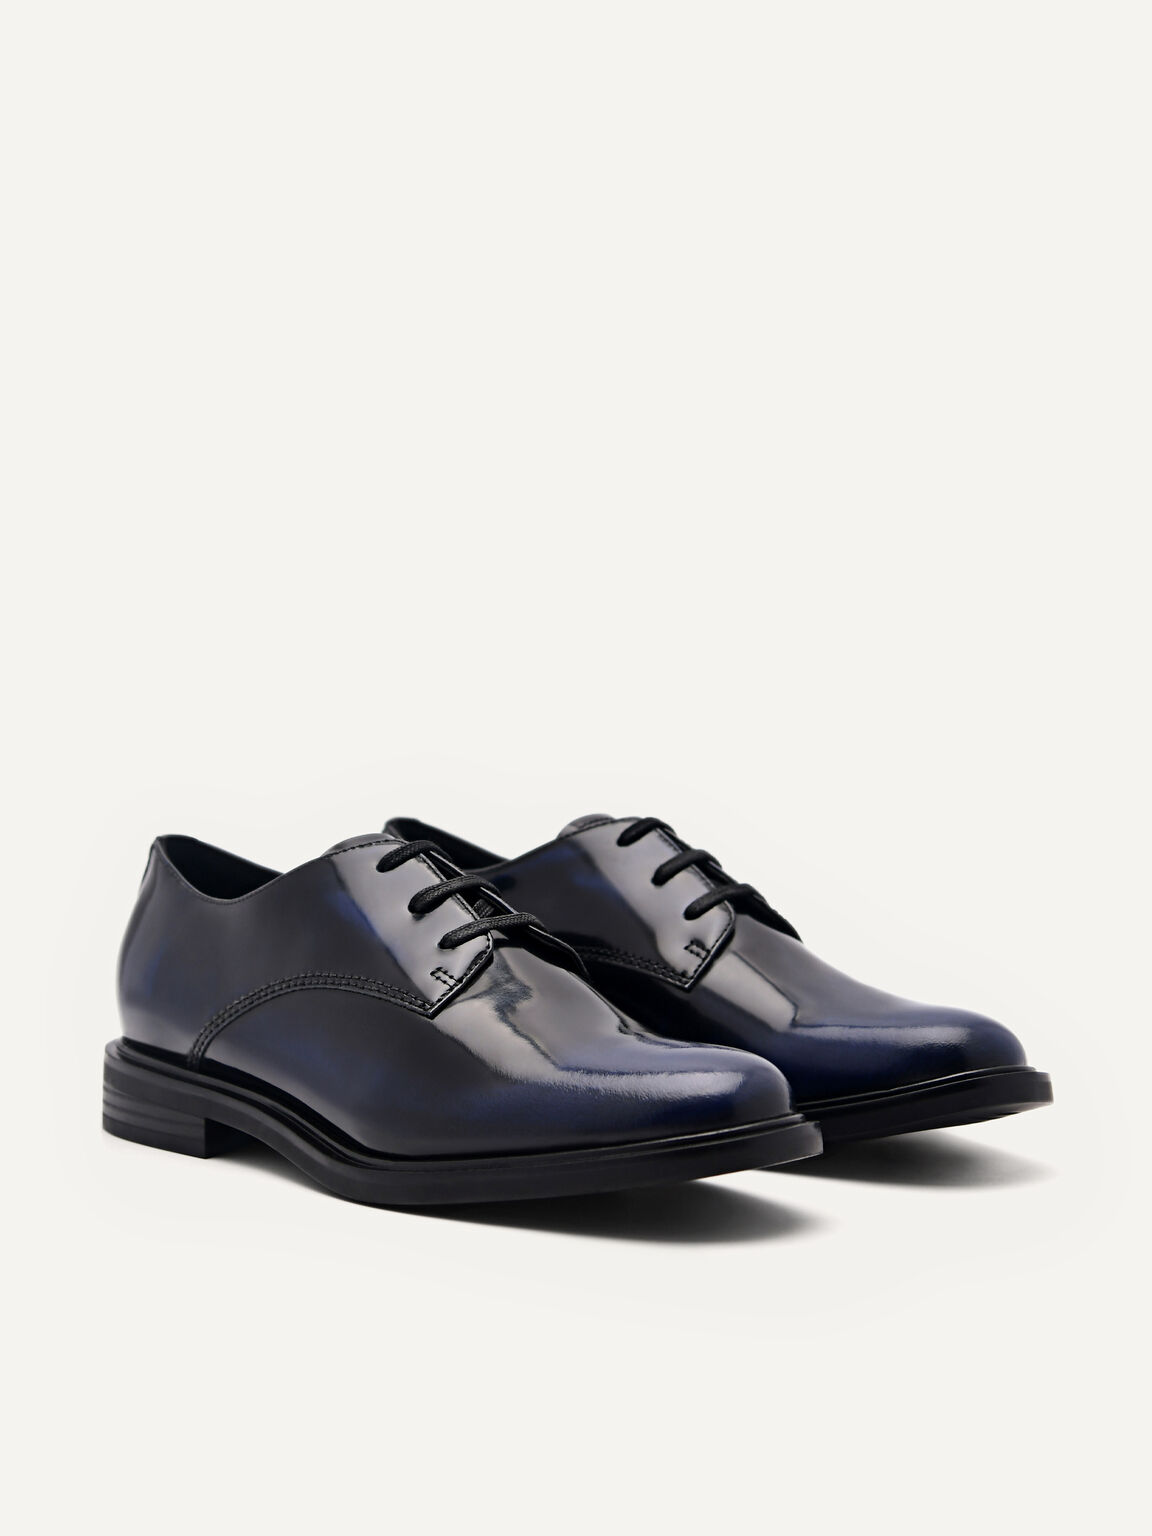 PEDRO Studio Lou Leather Derby Shoes, Navy